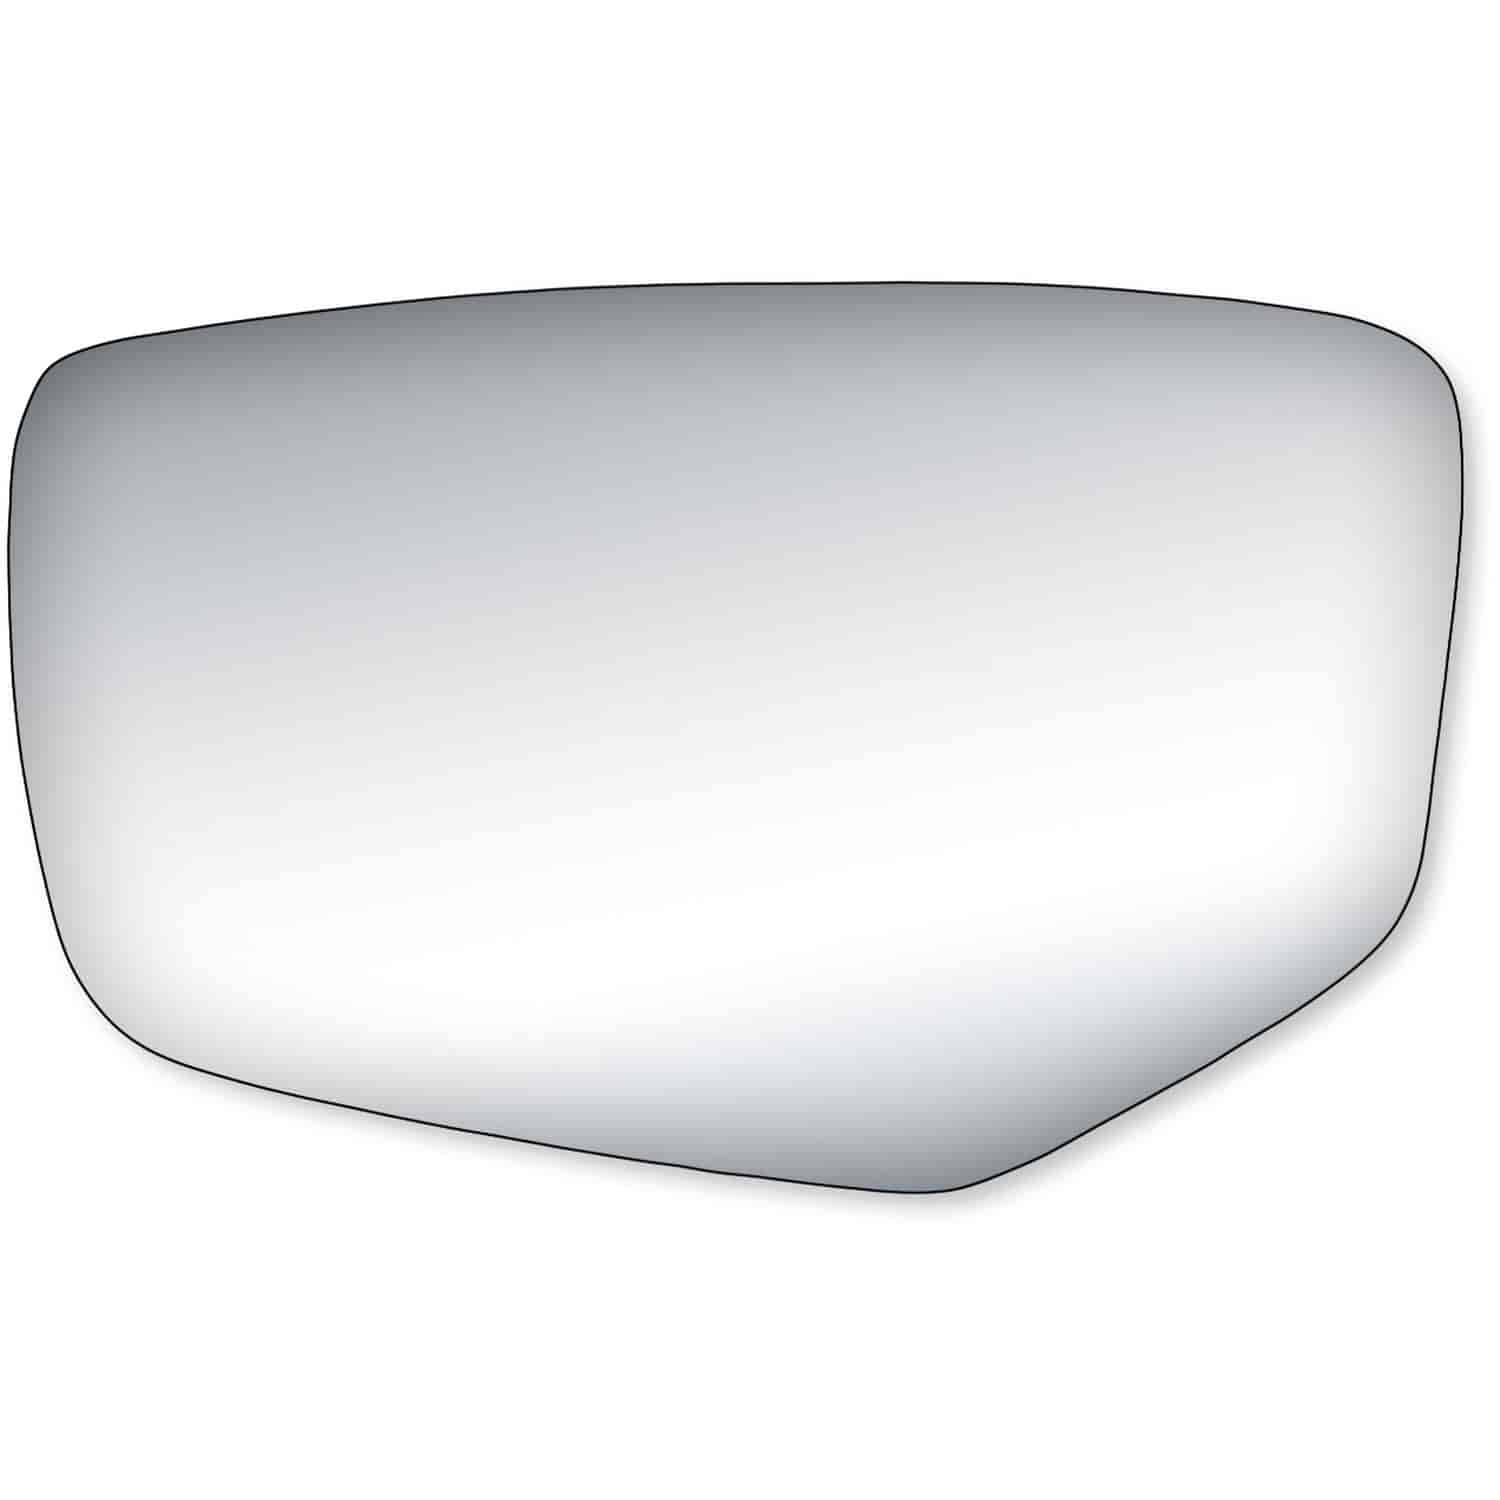 Replacement Glass for 08-12 Accord Coupe/ Sedan the